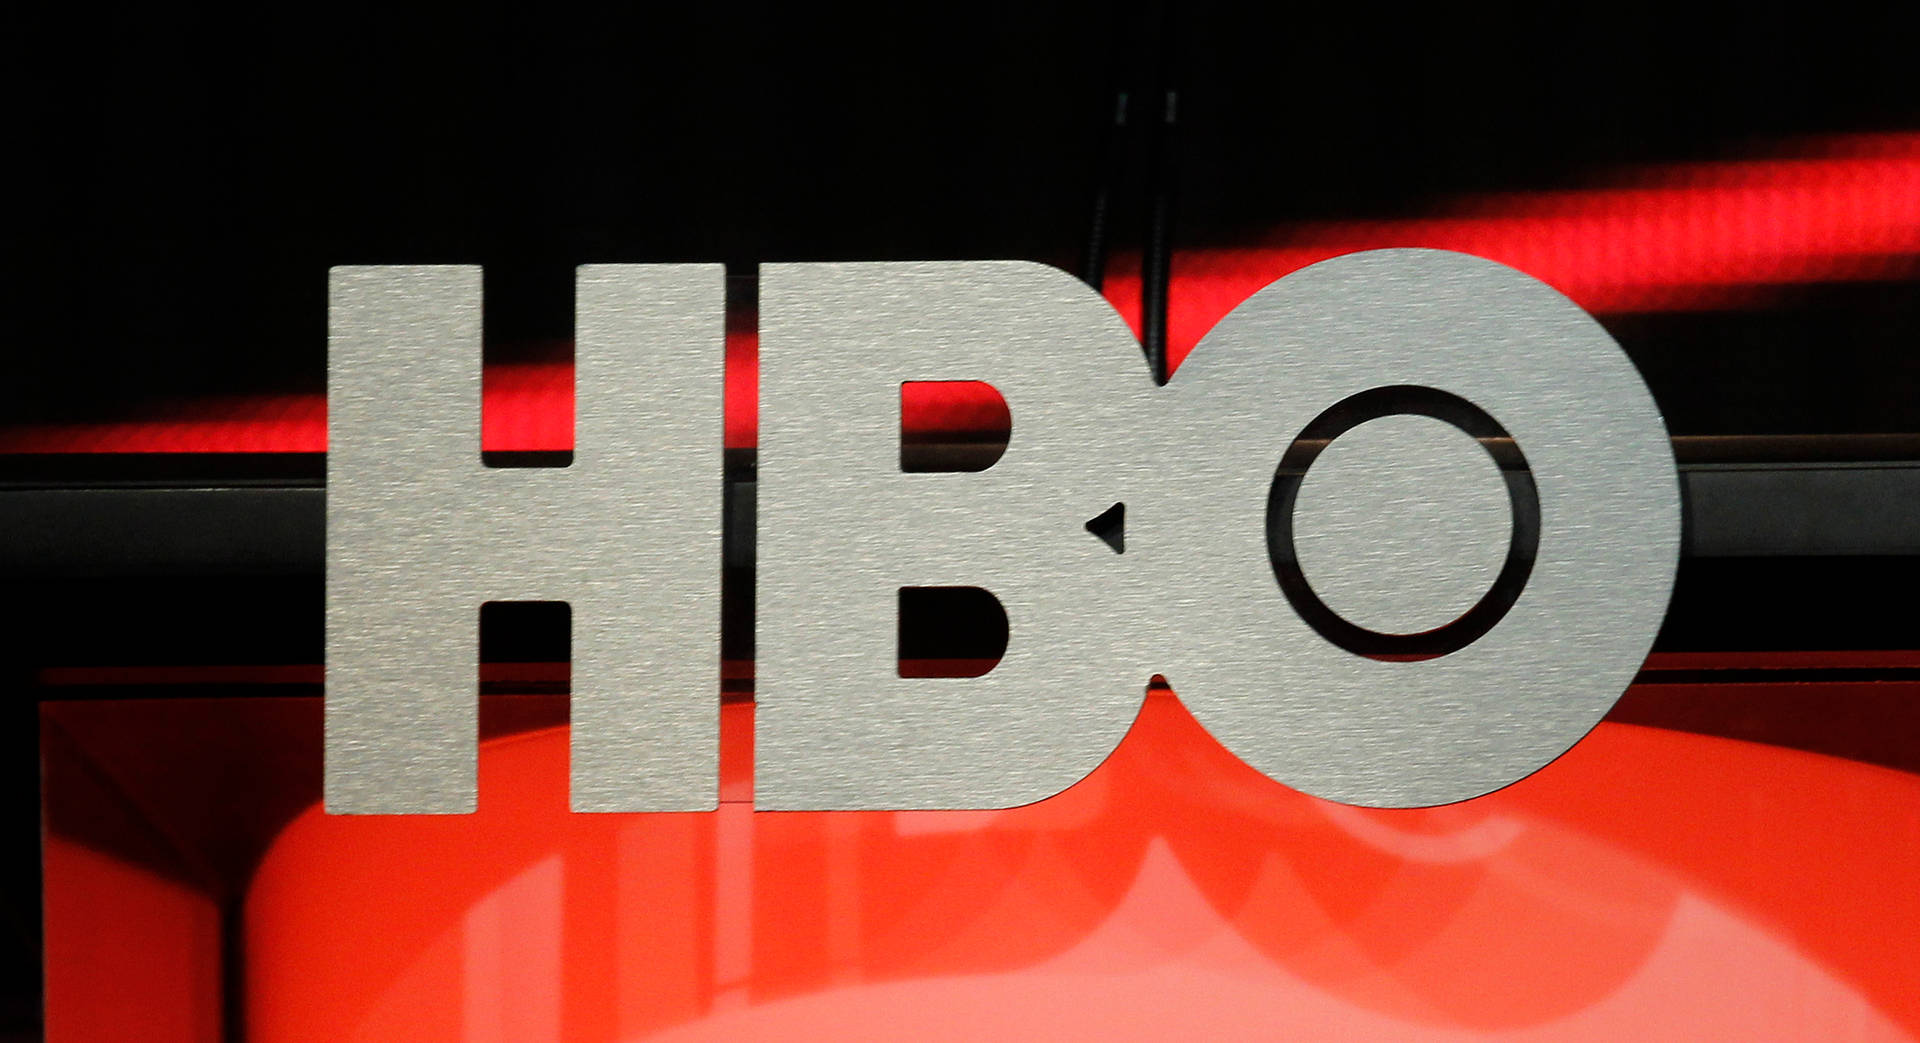 HBO Pictures